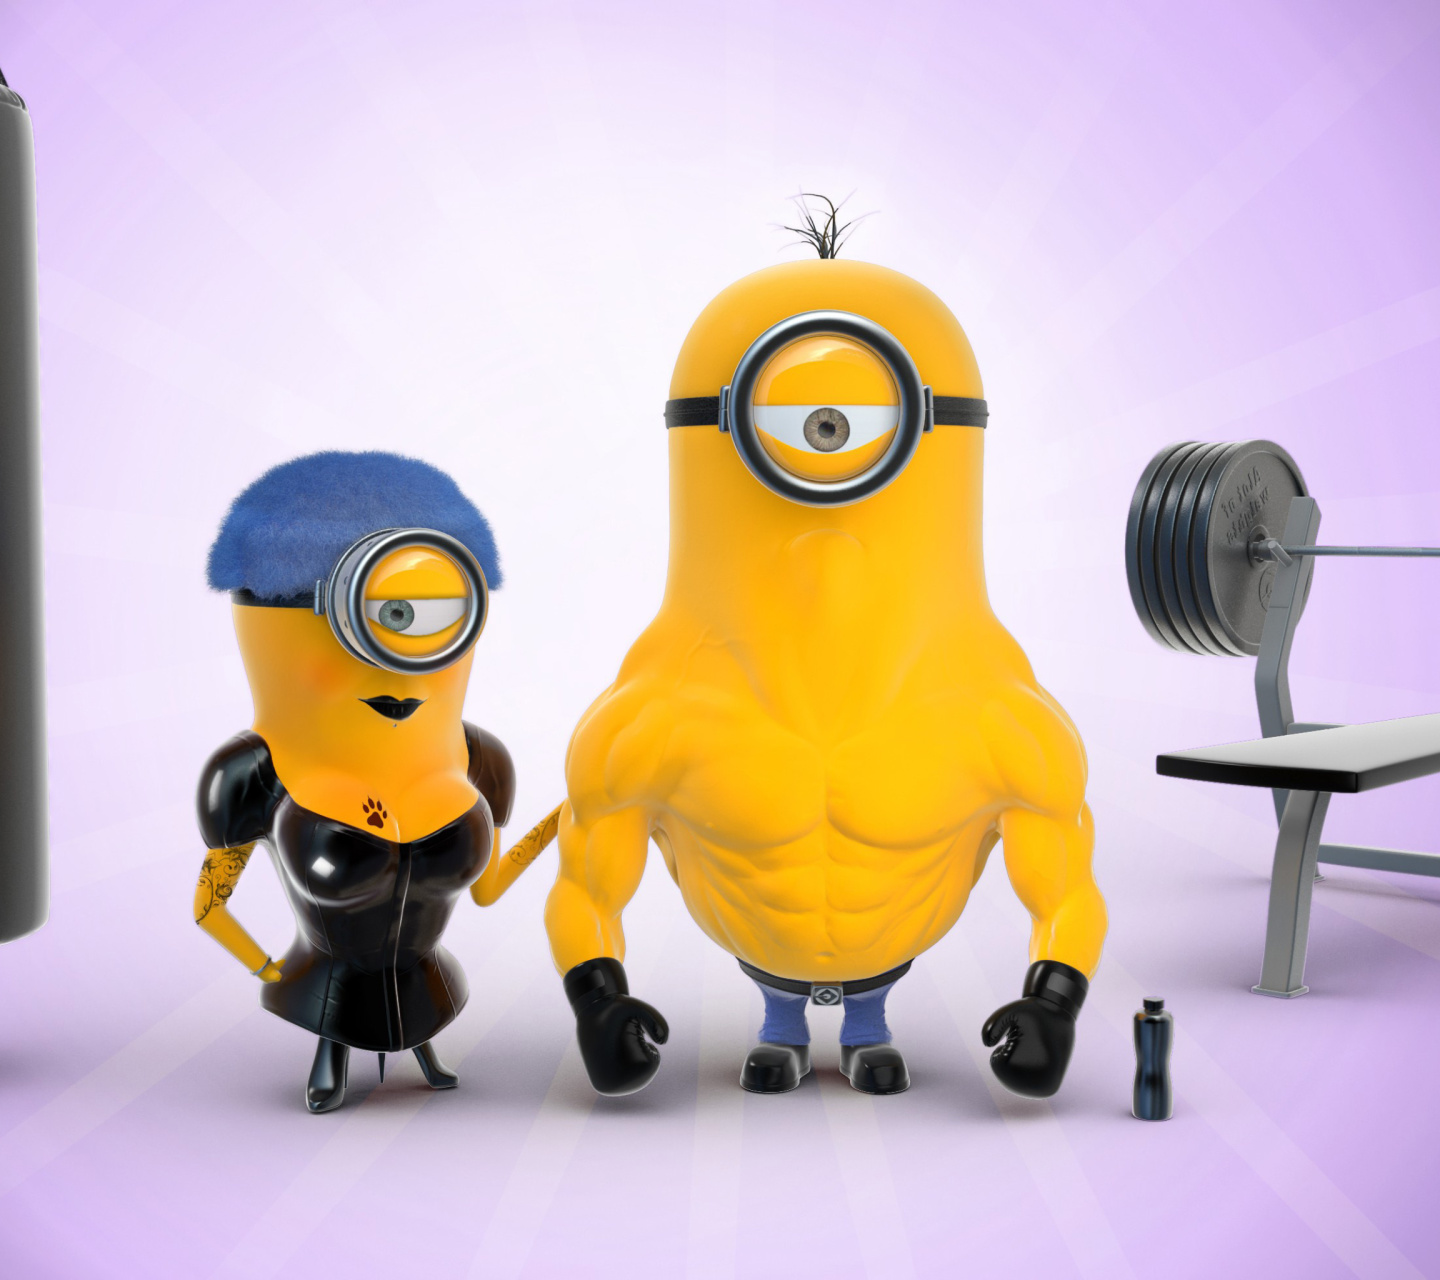 Despicable Me 2 in Gym screenshot #1 1440x1280